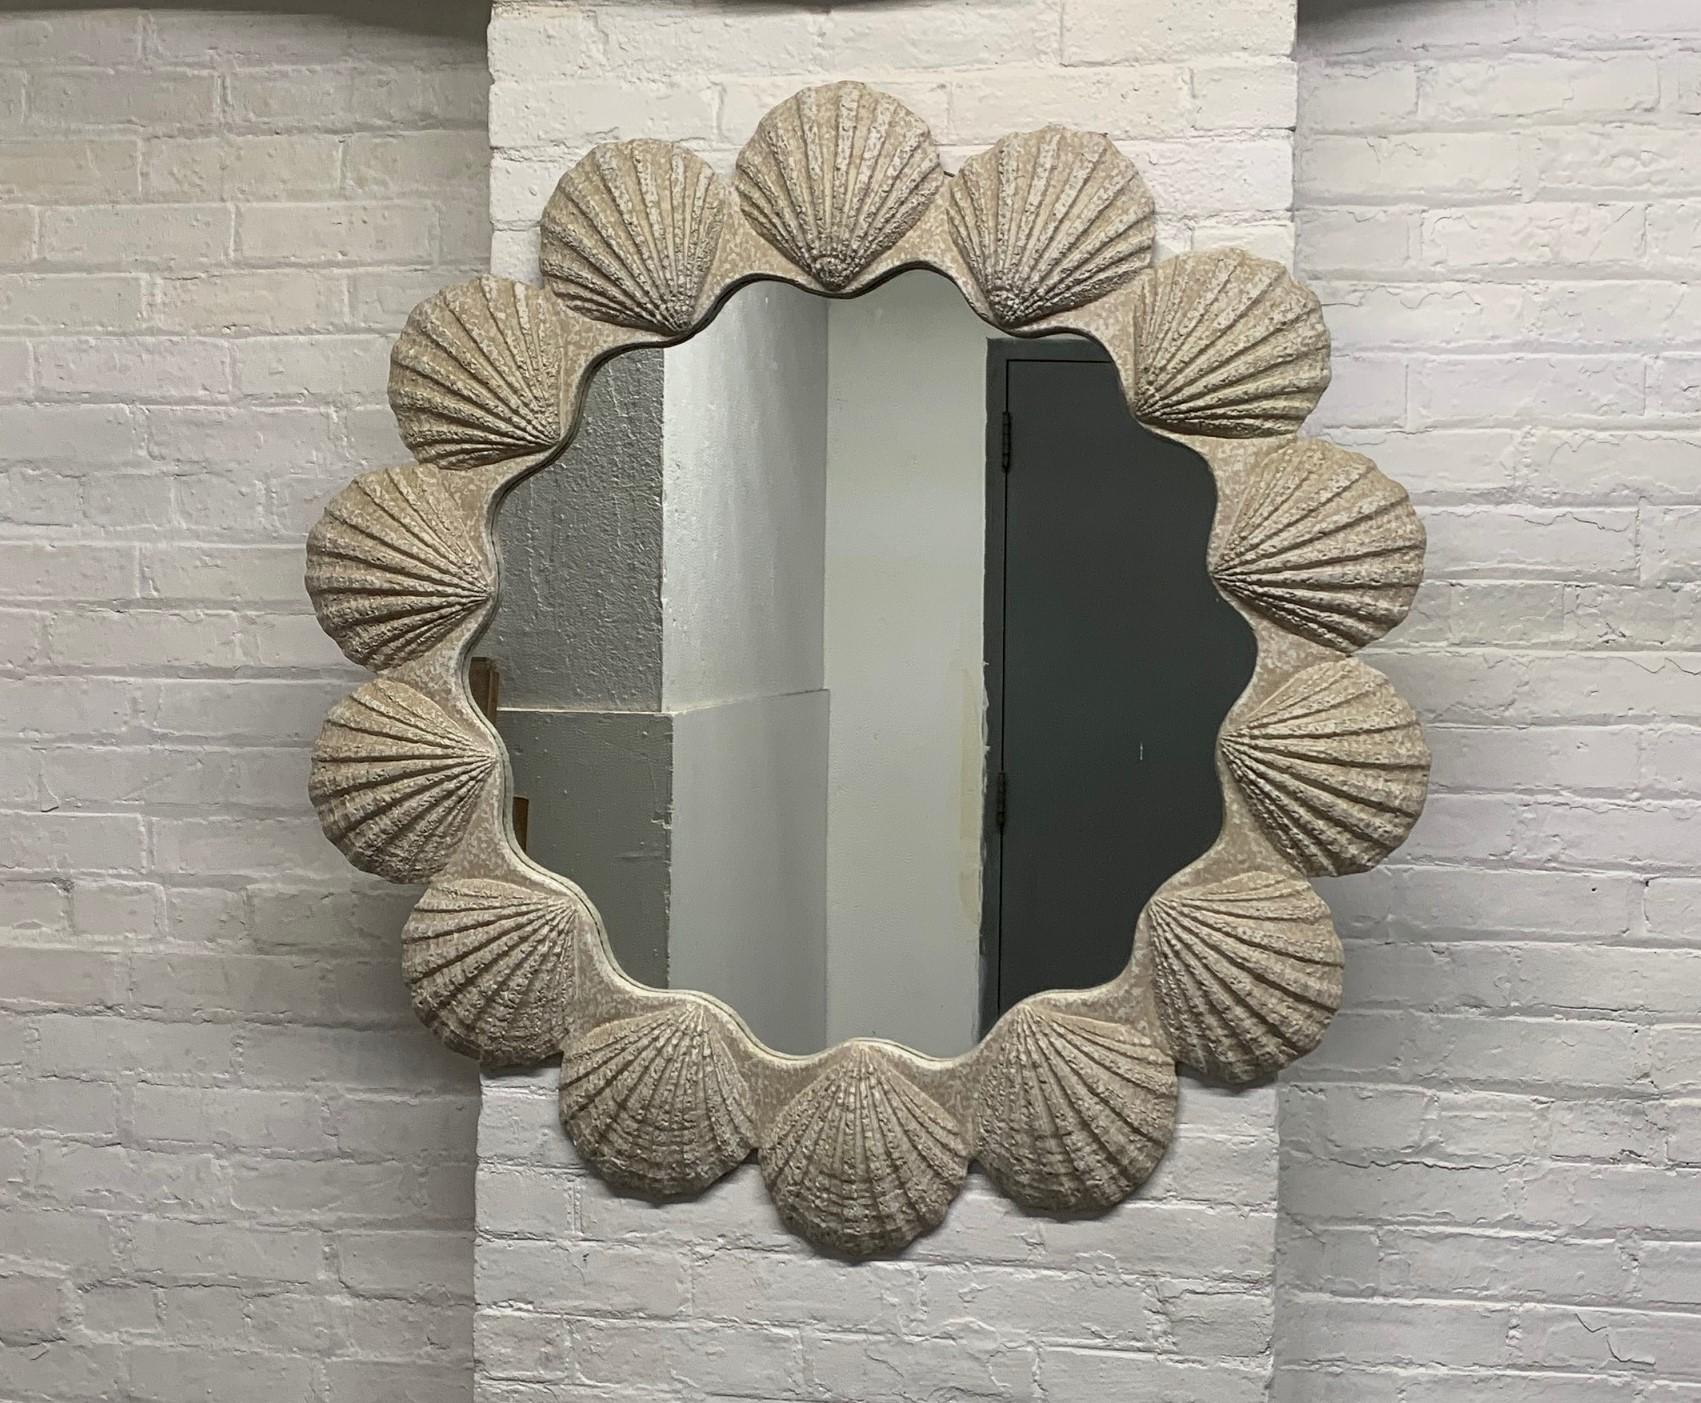 Large plaster shell form mirror. The mirror has a decorative textured shell formed frame and is in great condition.